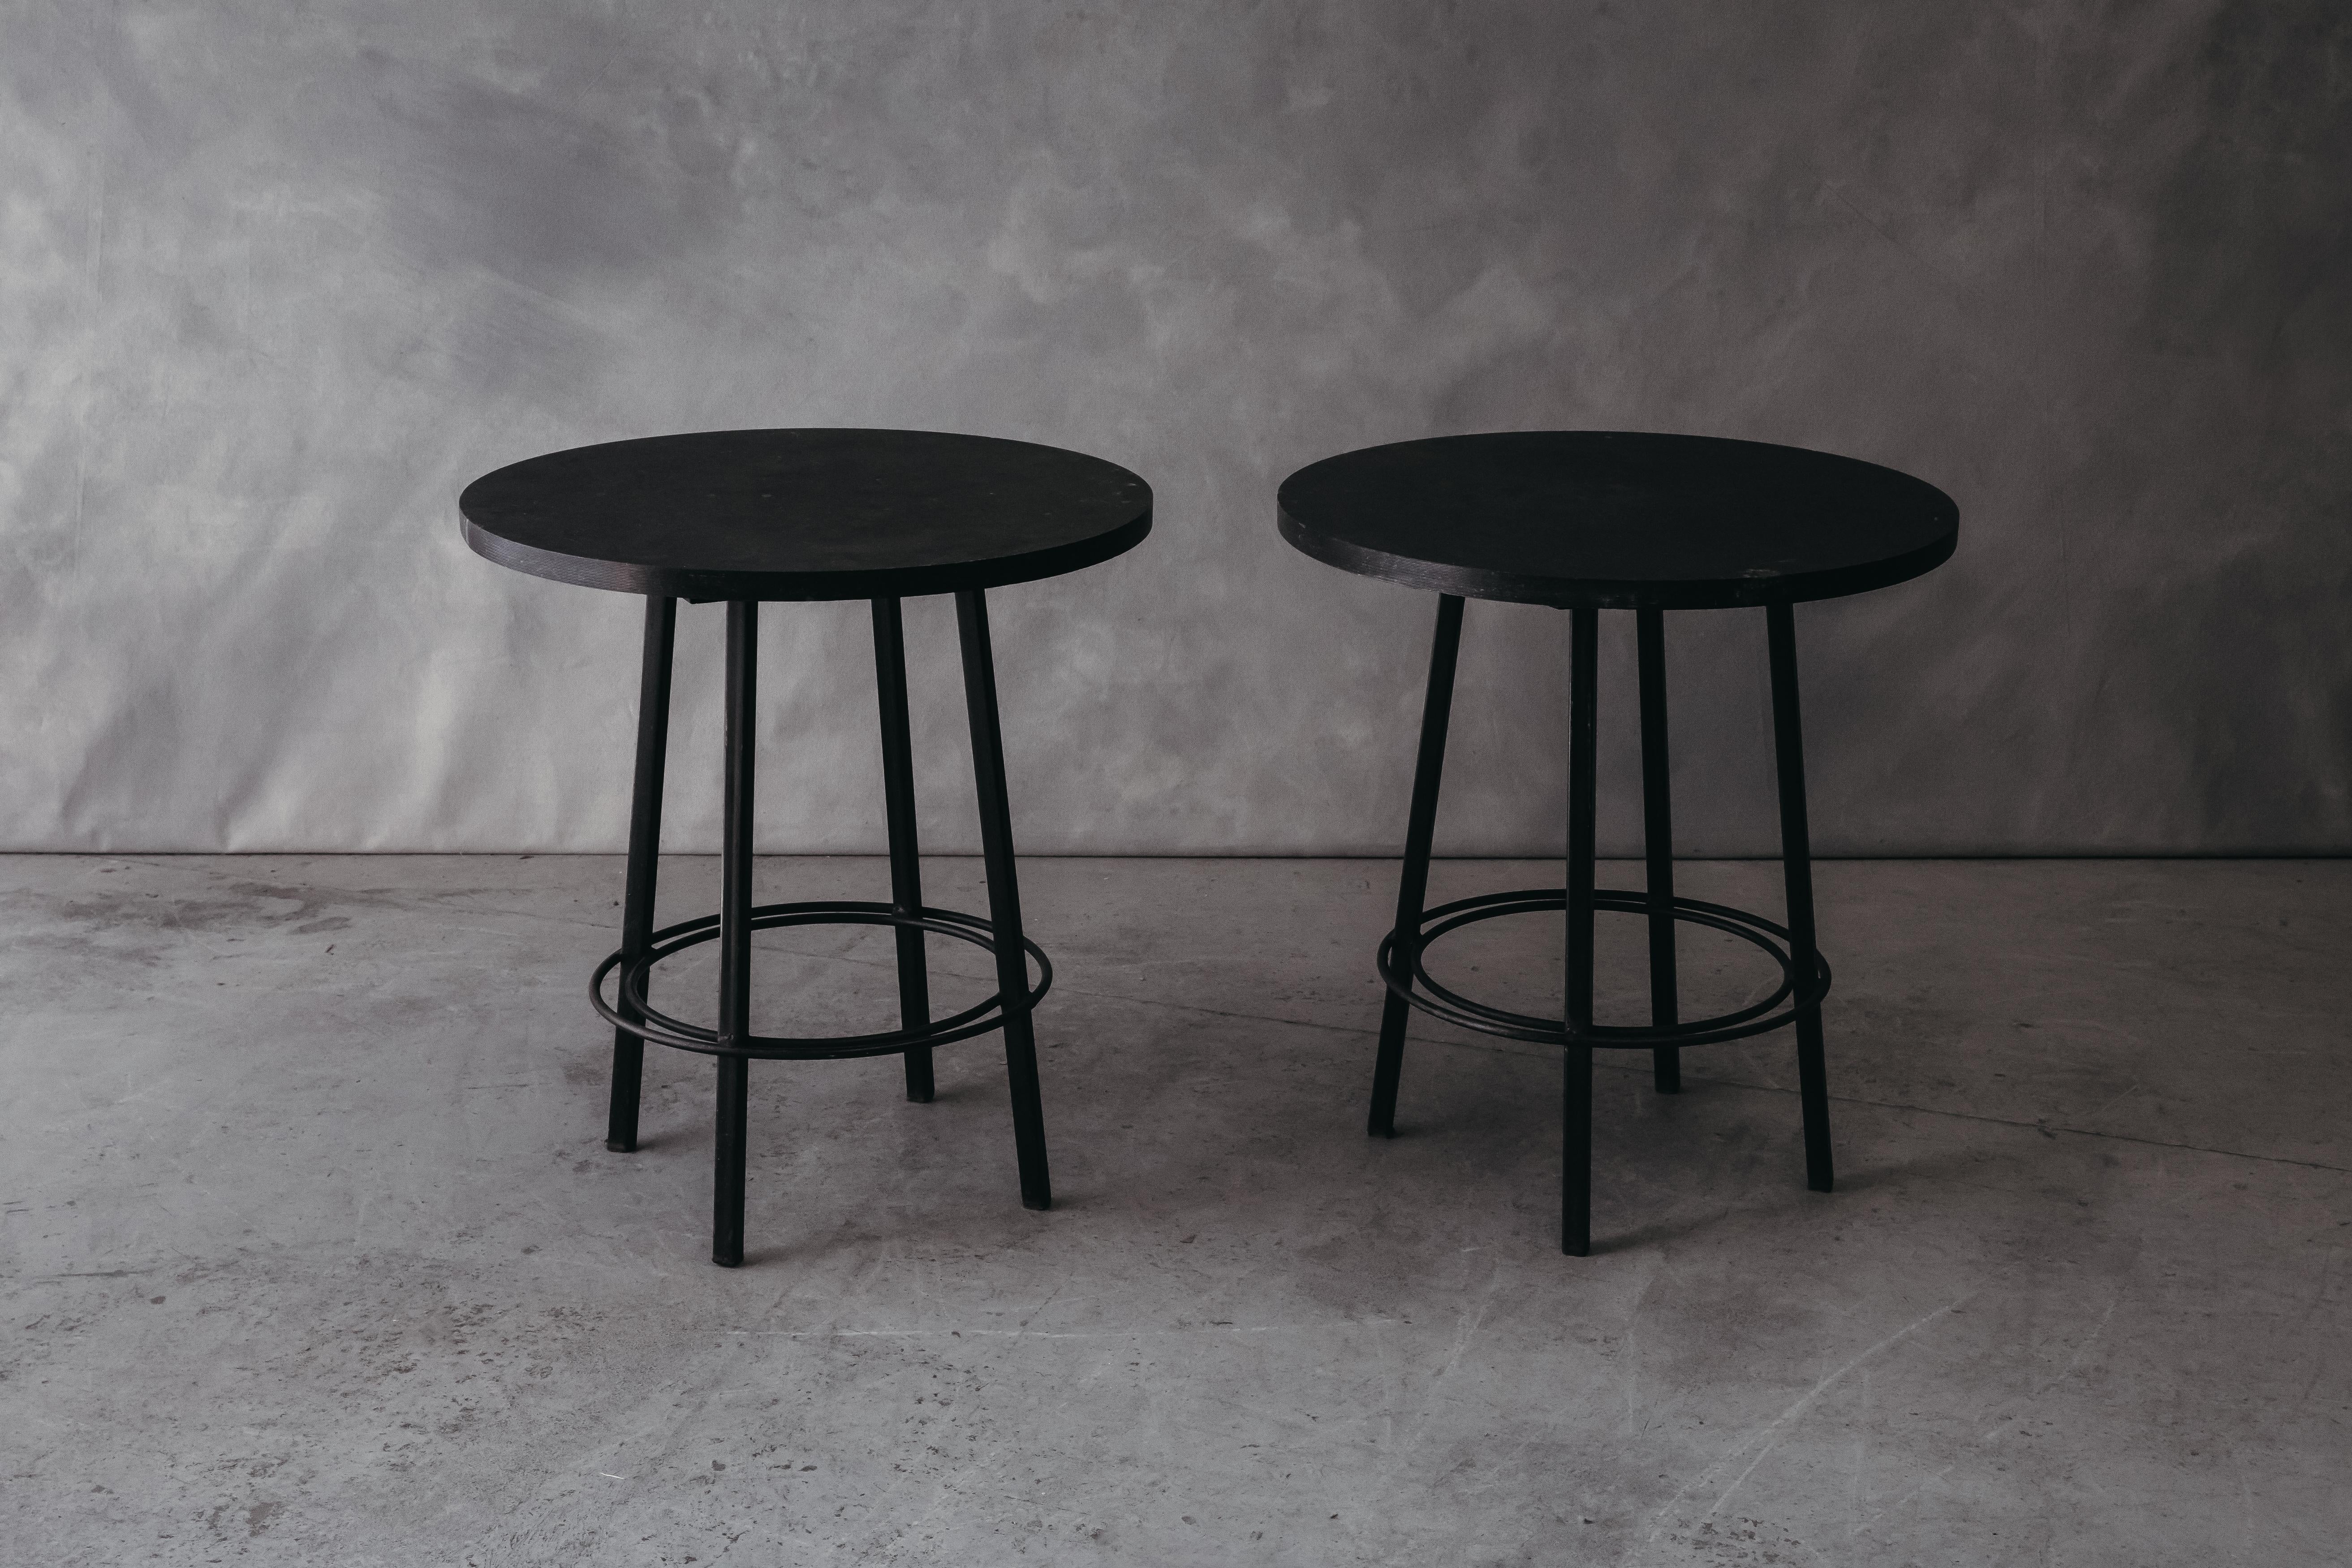 European Vintage Pair of Stone Bistro Tables from France, circa 1970 For Sale